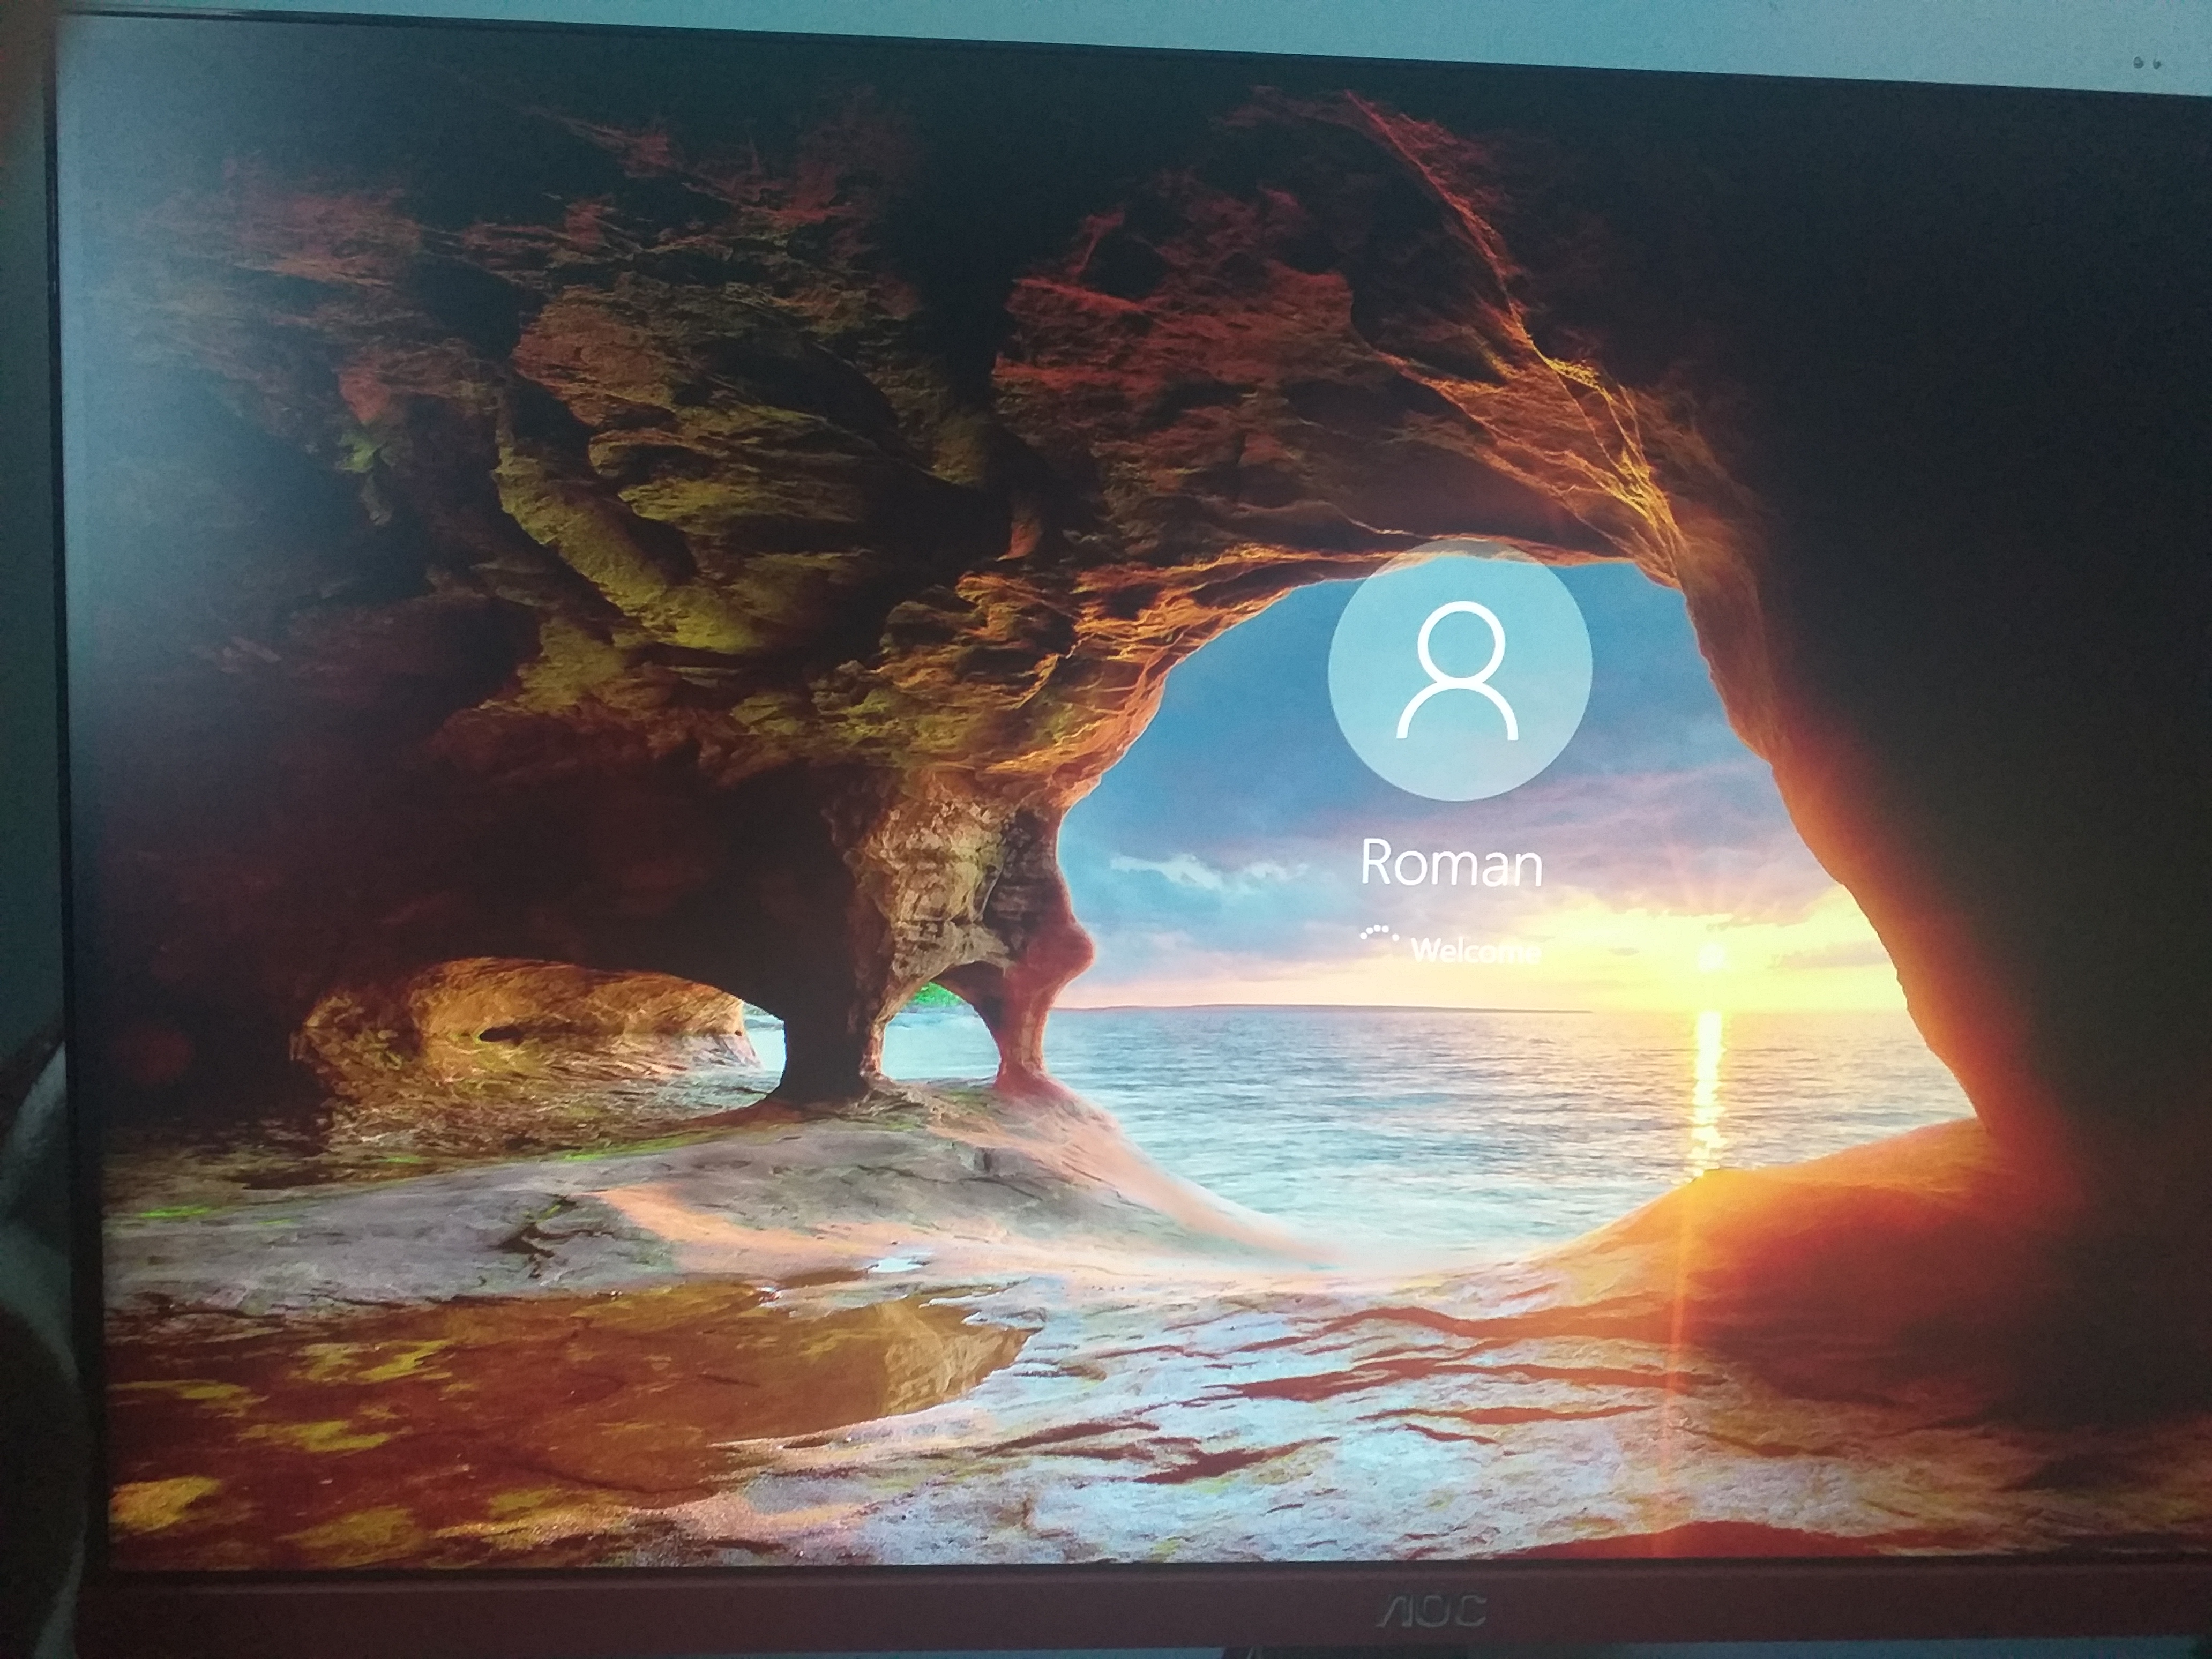 Windows 10 Lock Screen Images Location Not Showing : Windows 10 ...